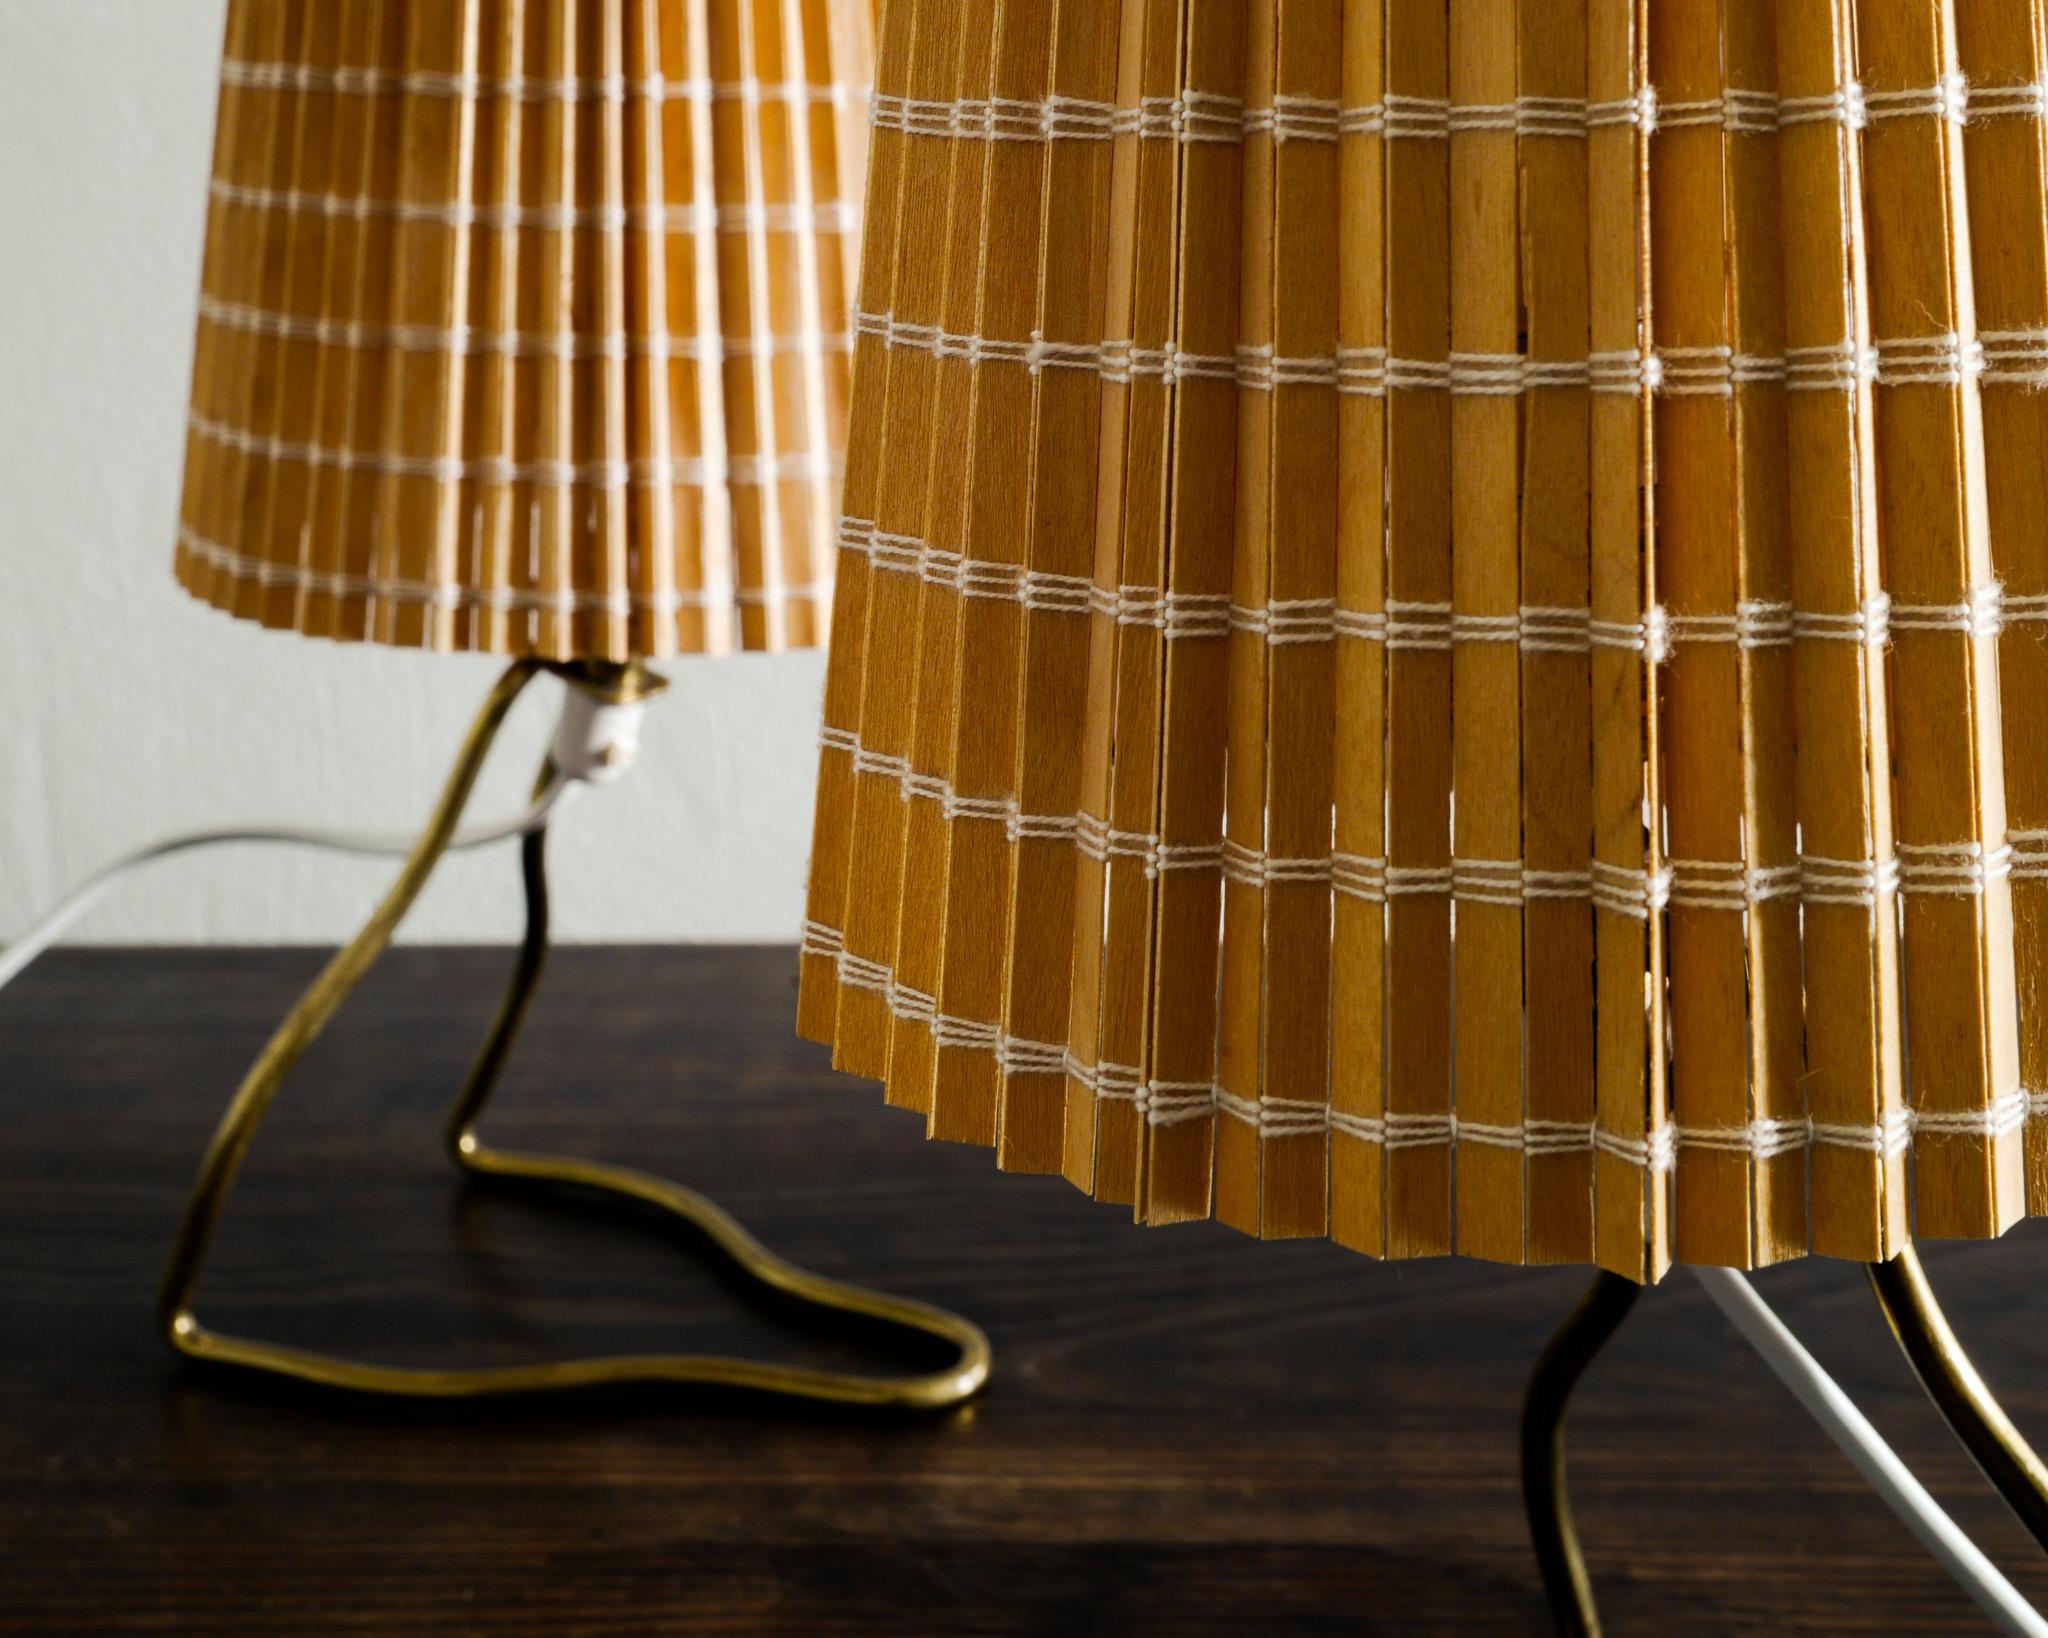 Pair of Mauri Almari Bed Table Lamps in Brass & Straw Shades Produced by Idman  2